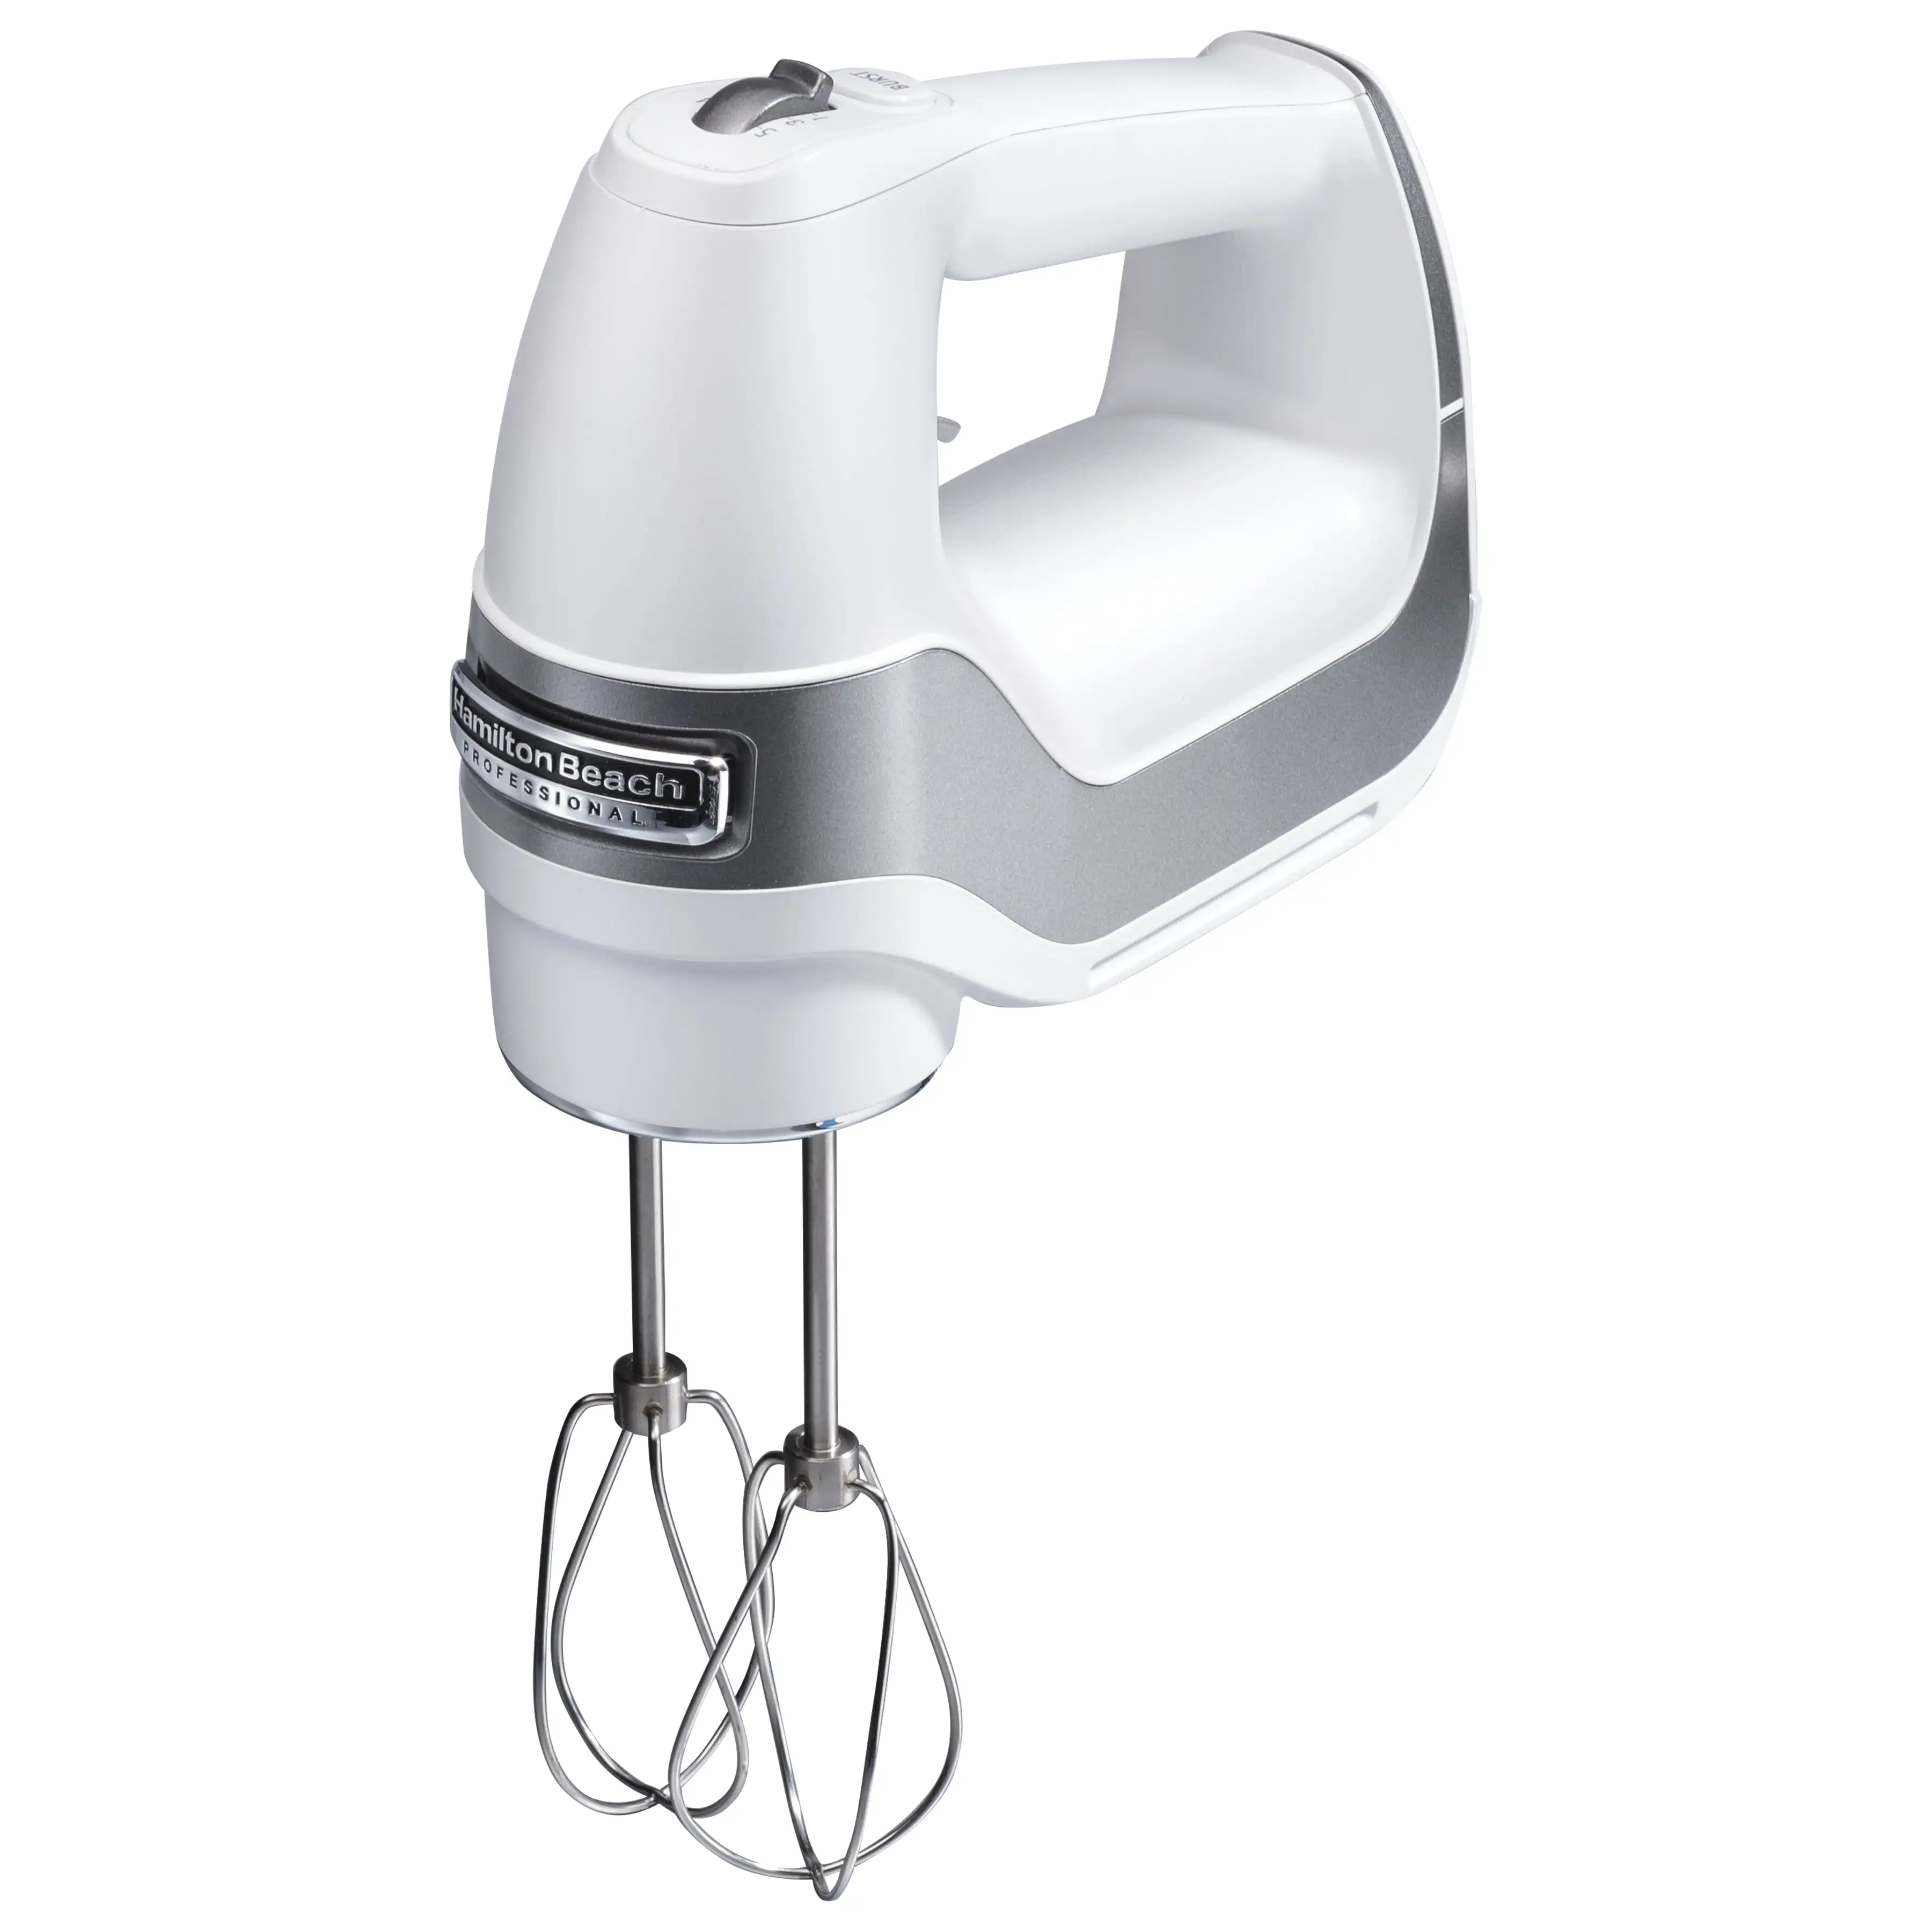 Professional 5 Speed Hand Mixer, White, 62652 Free Shipping